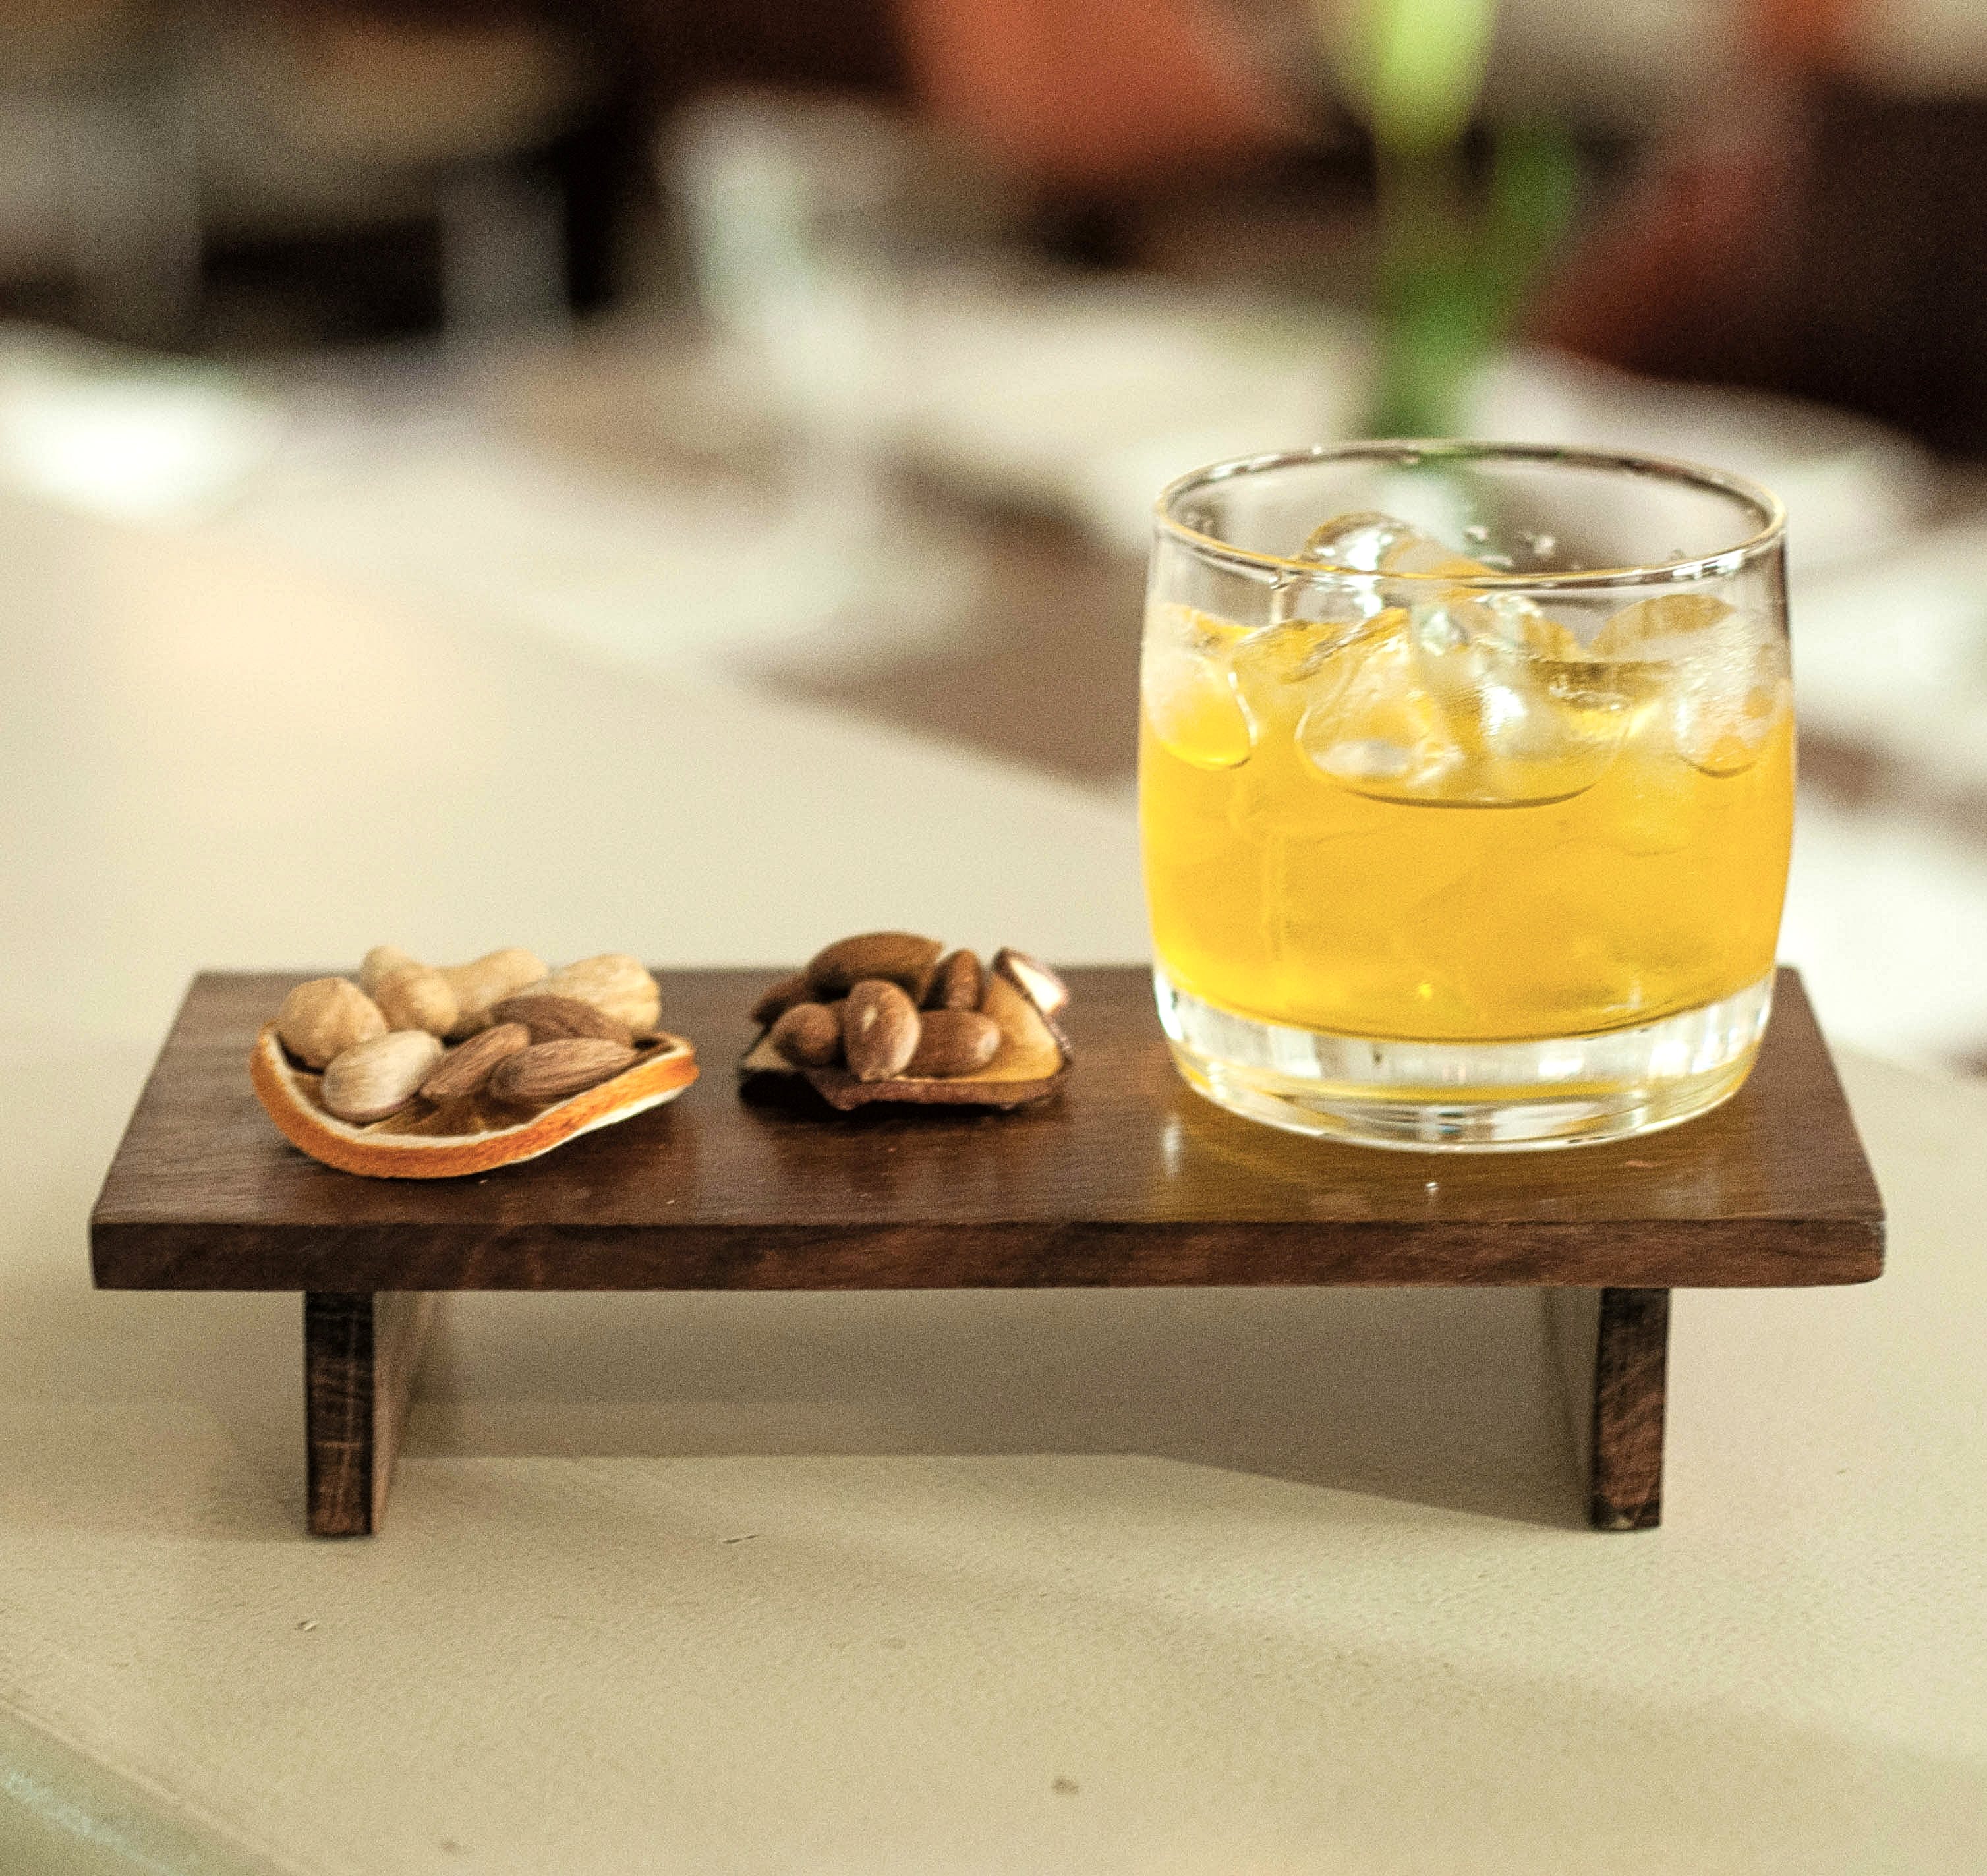 Drink,Food,Alcoholic beverage,Distilled beverage,Old fashioned glass,Rusty nail,Sour,Ingredient,Whiskey sour,Oyster